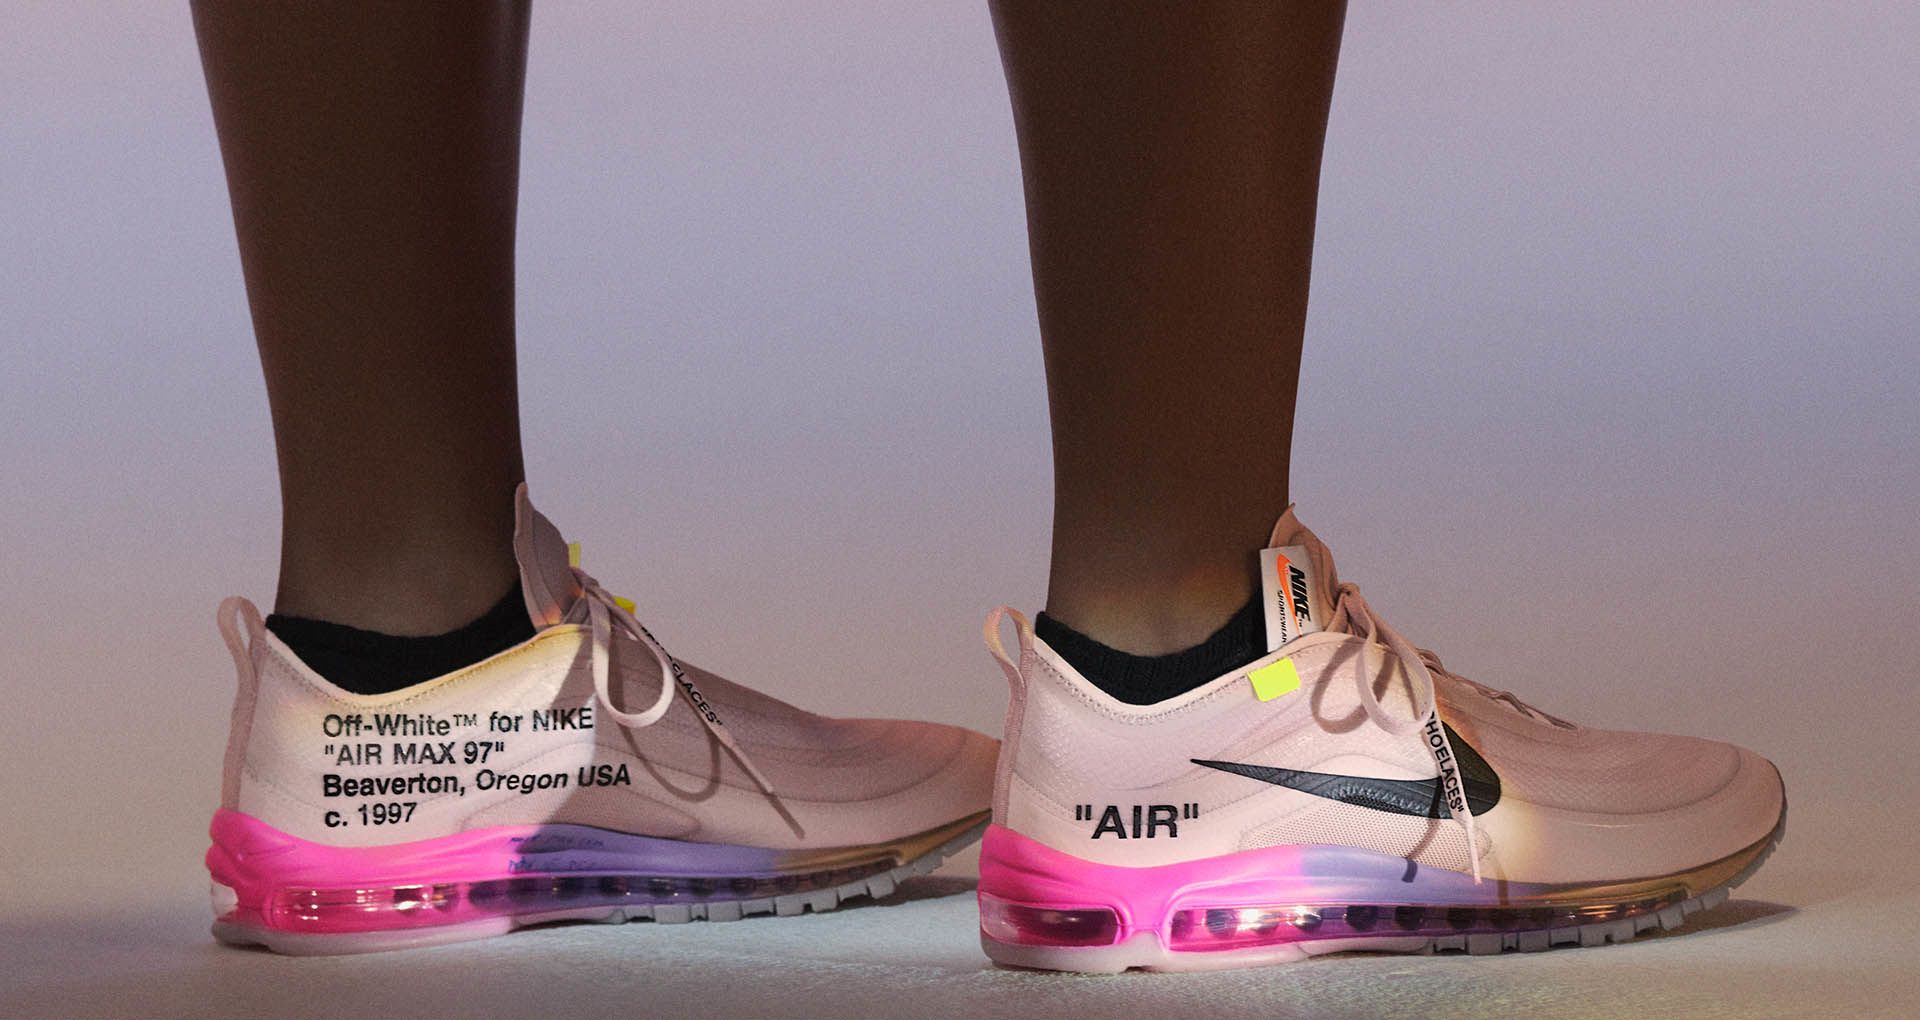 virgil abloh designed a nike collection for serena williams